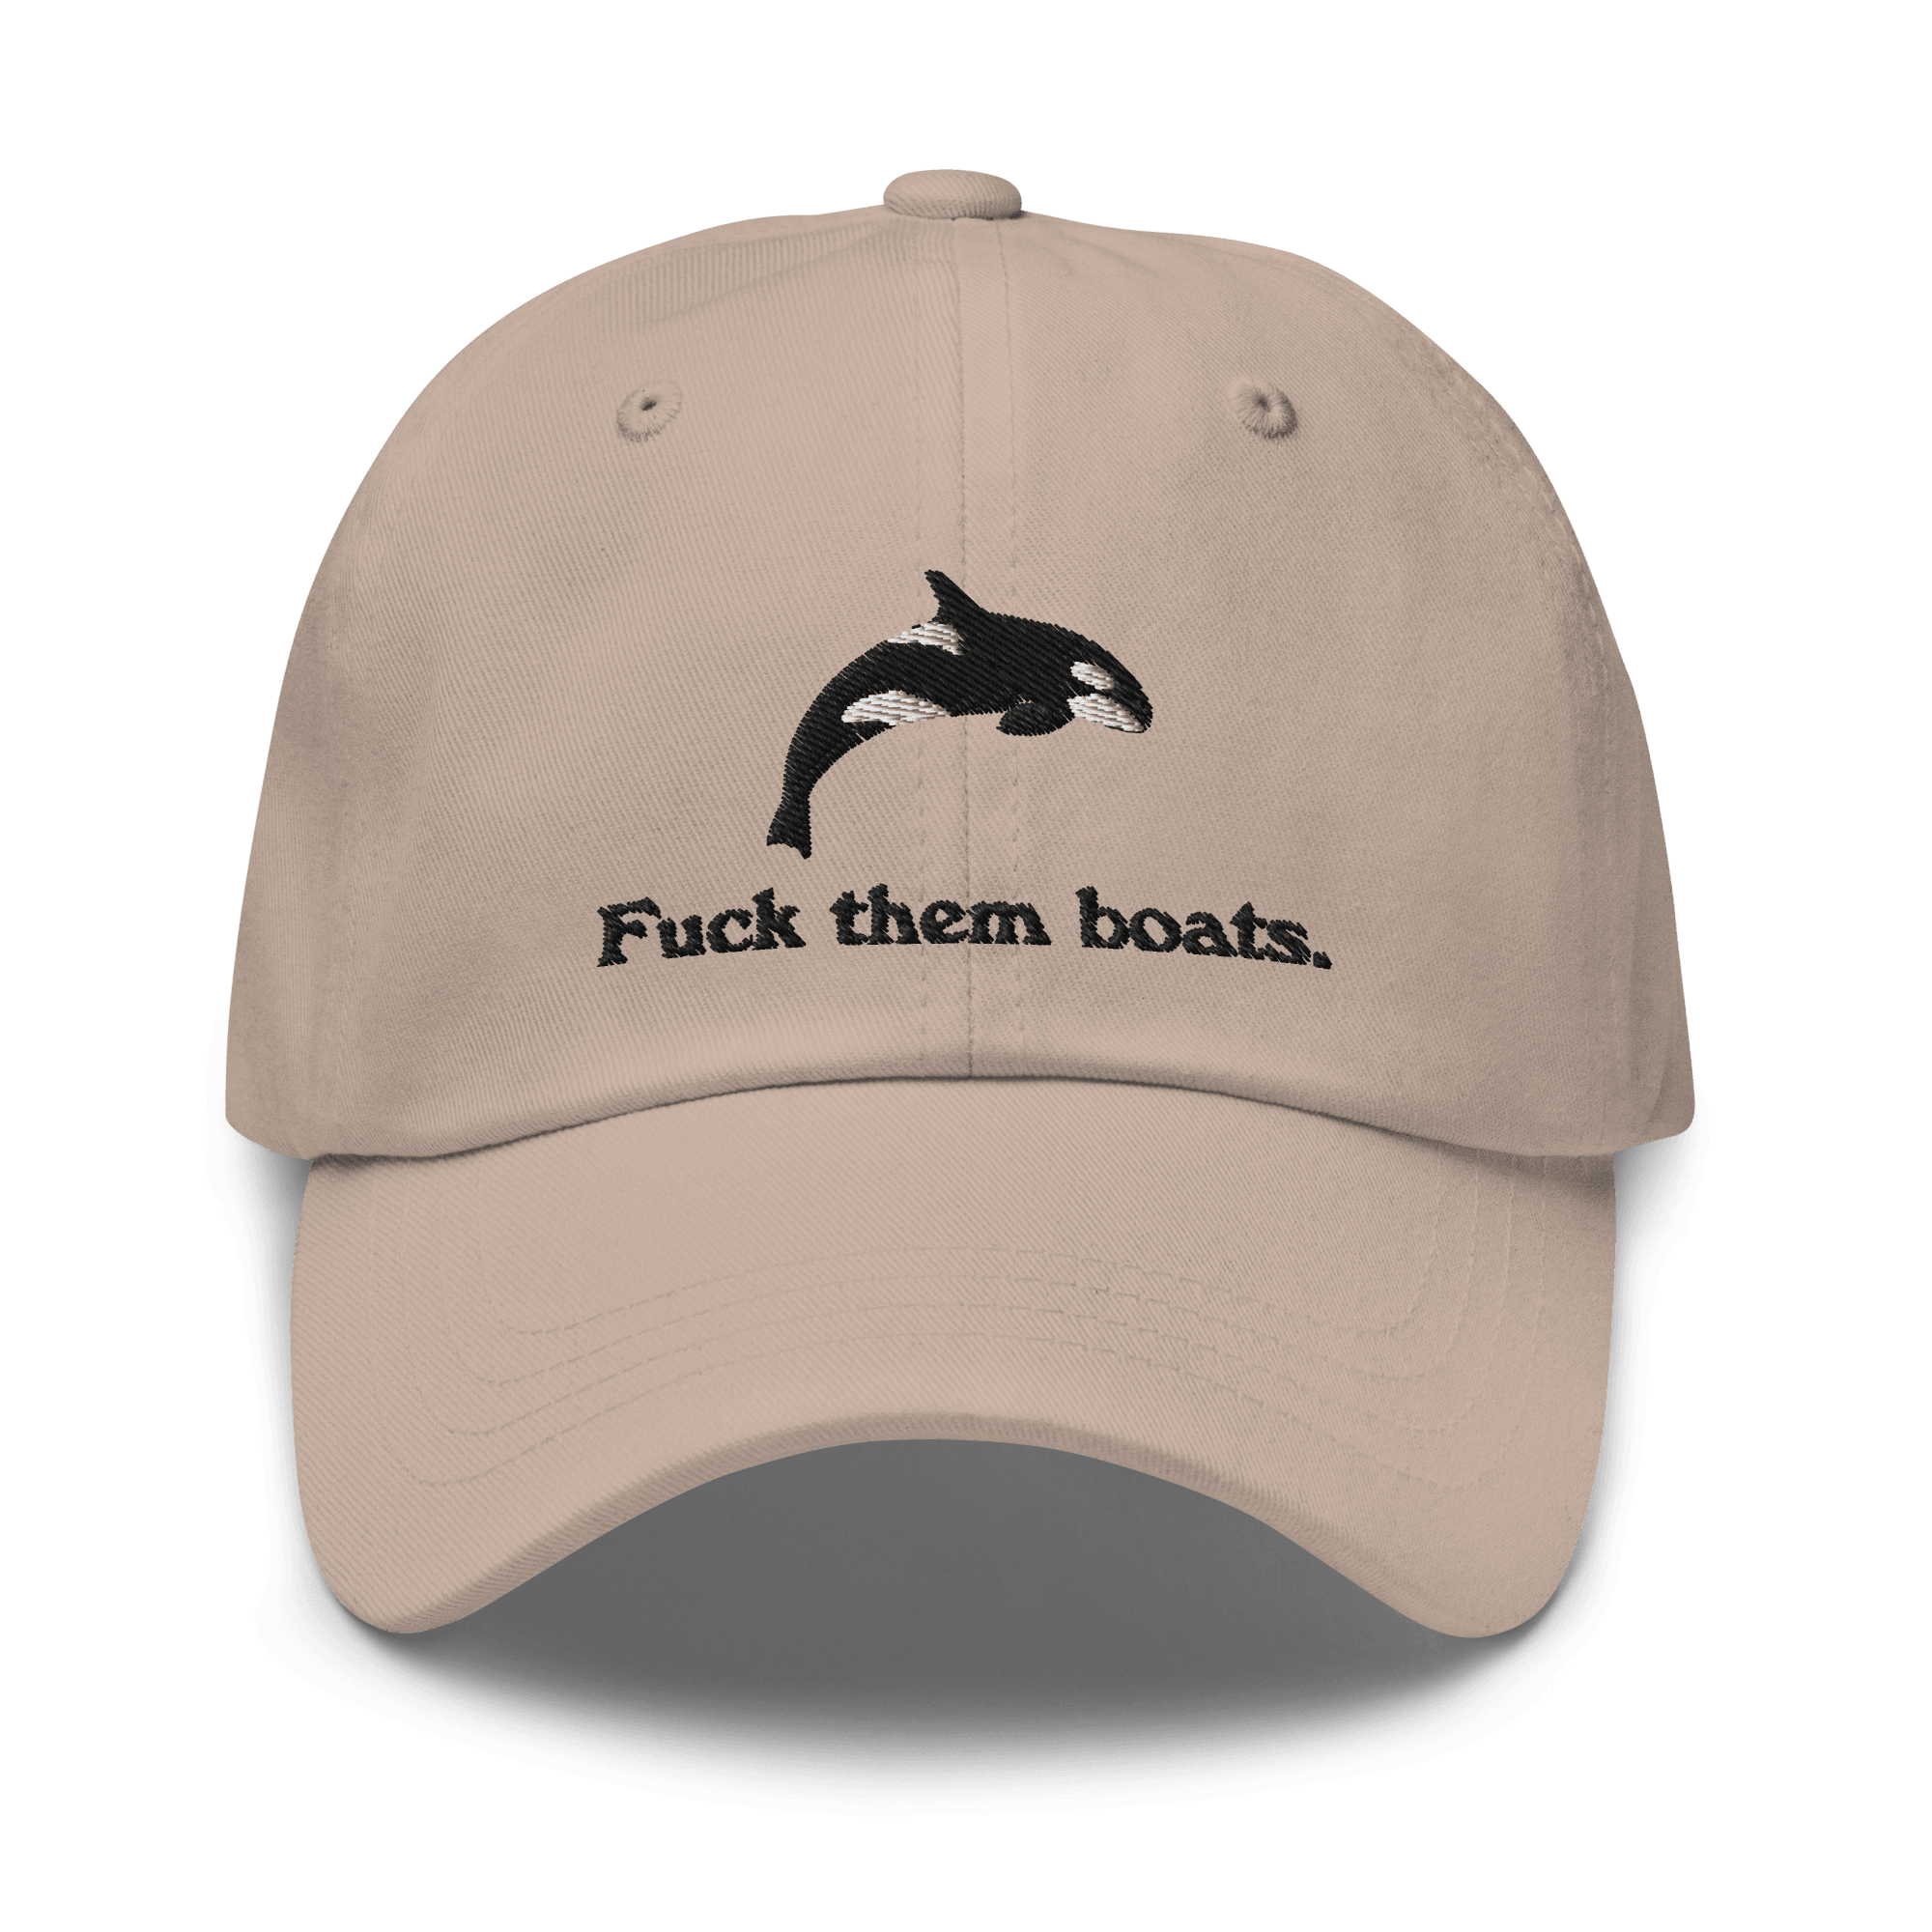 Fuck Them Boats - The Original Embroidered Orca Whale Hat - Polychrome Goods 🍊